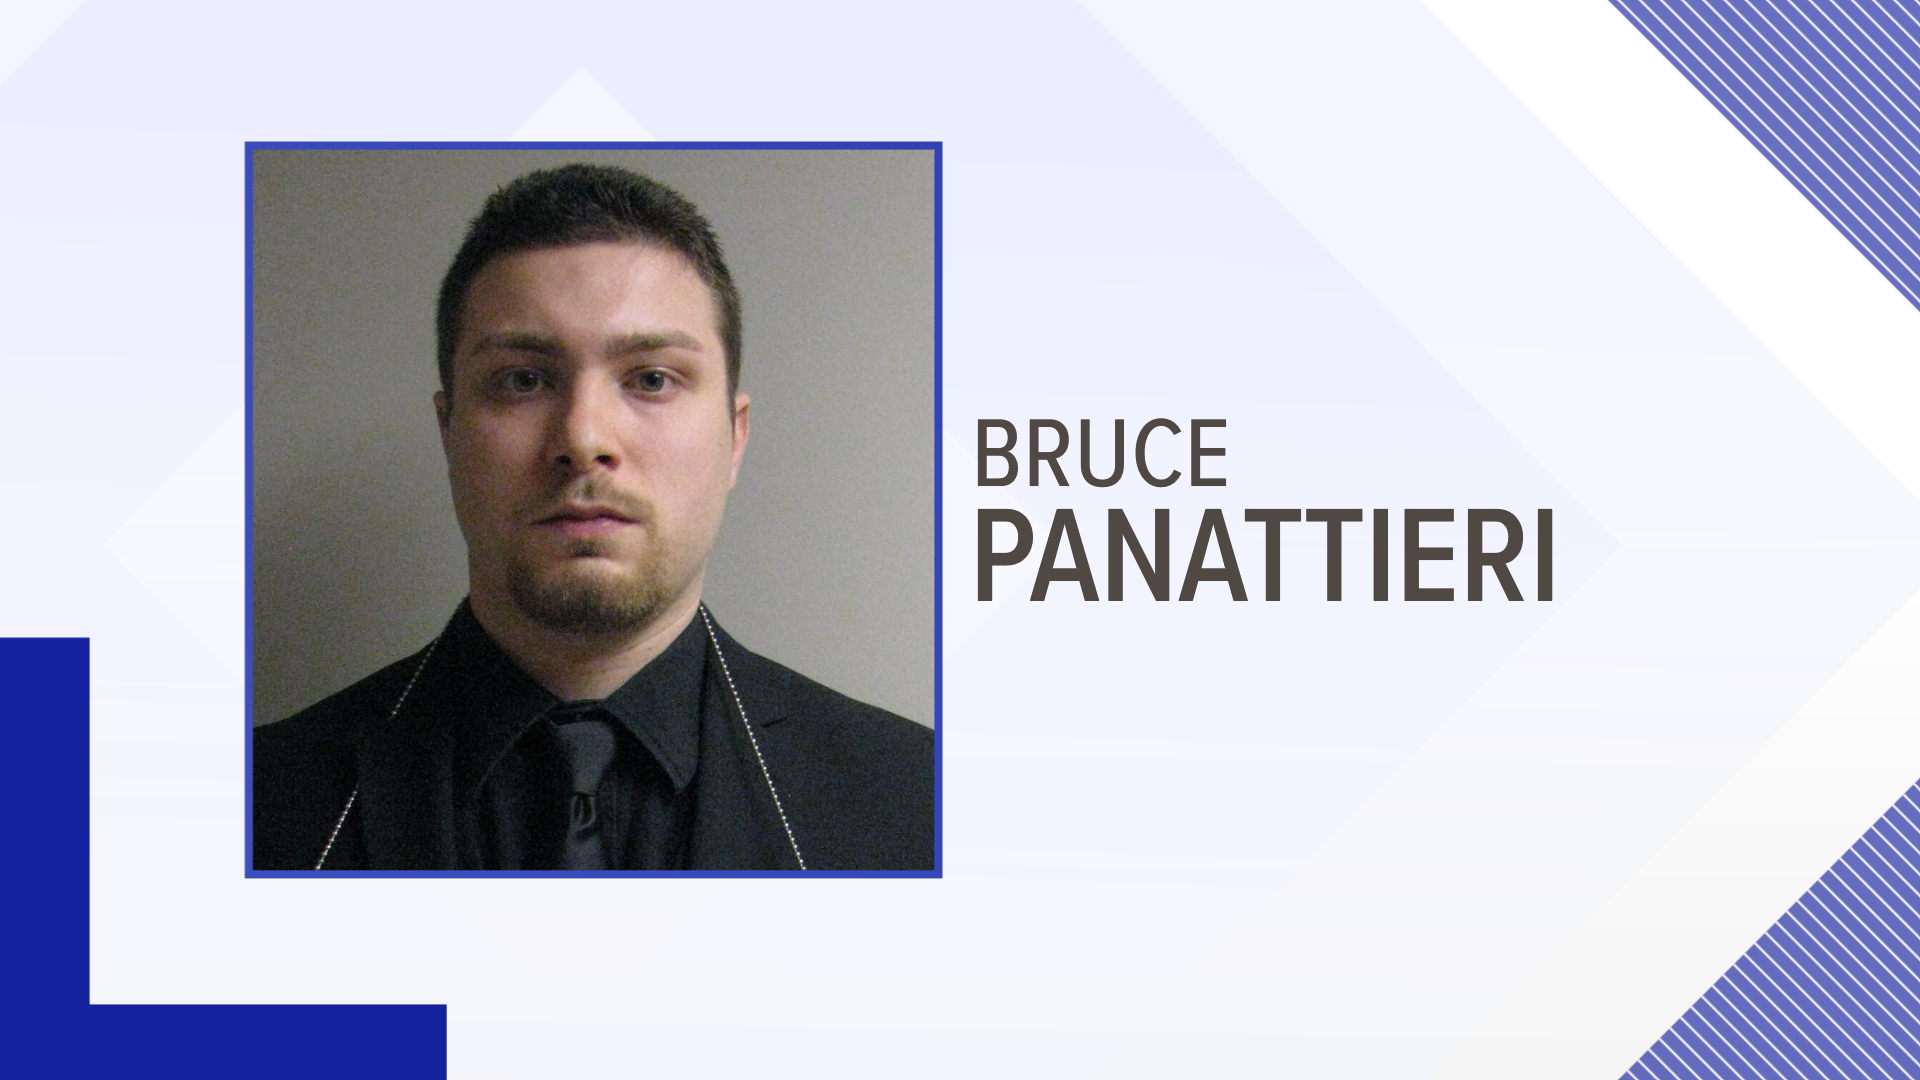 After a week-long trial, Bruce Panattieri was found guilty.